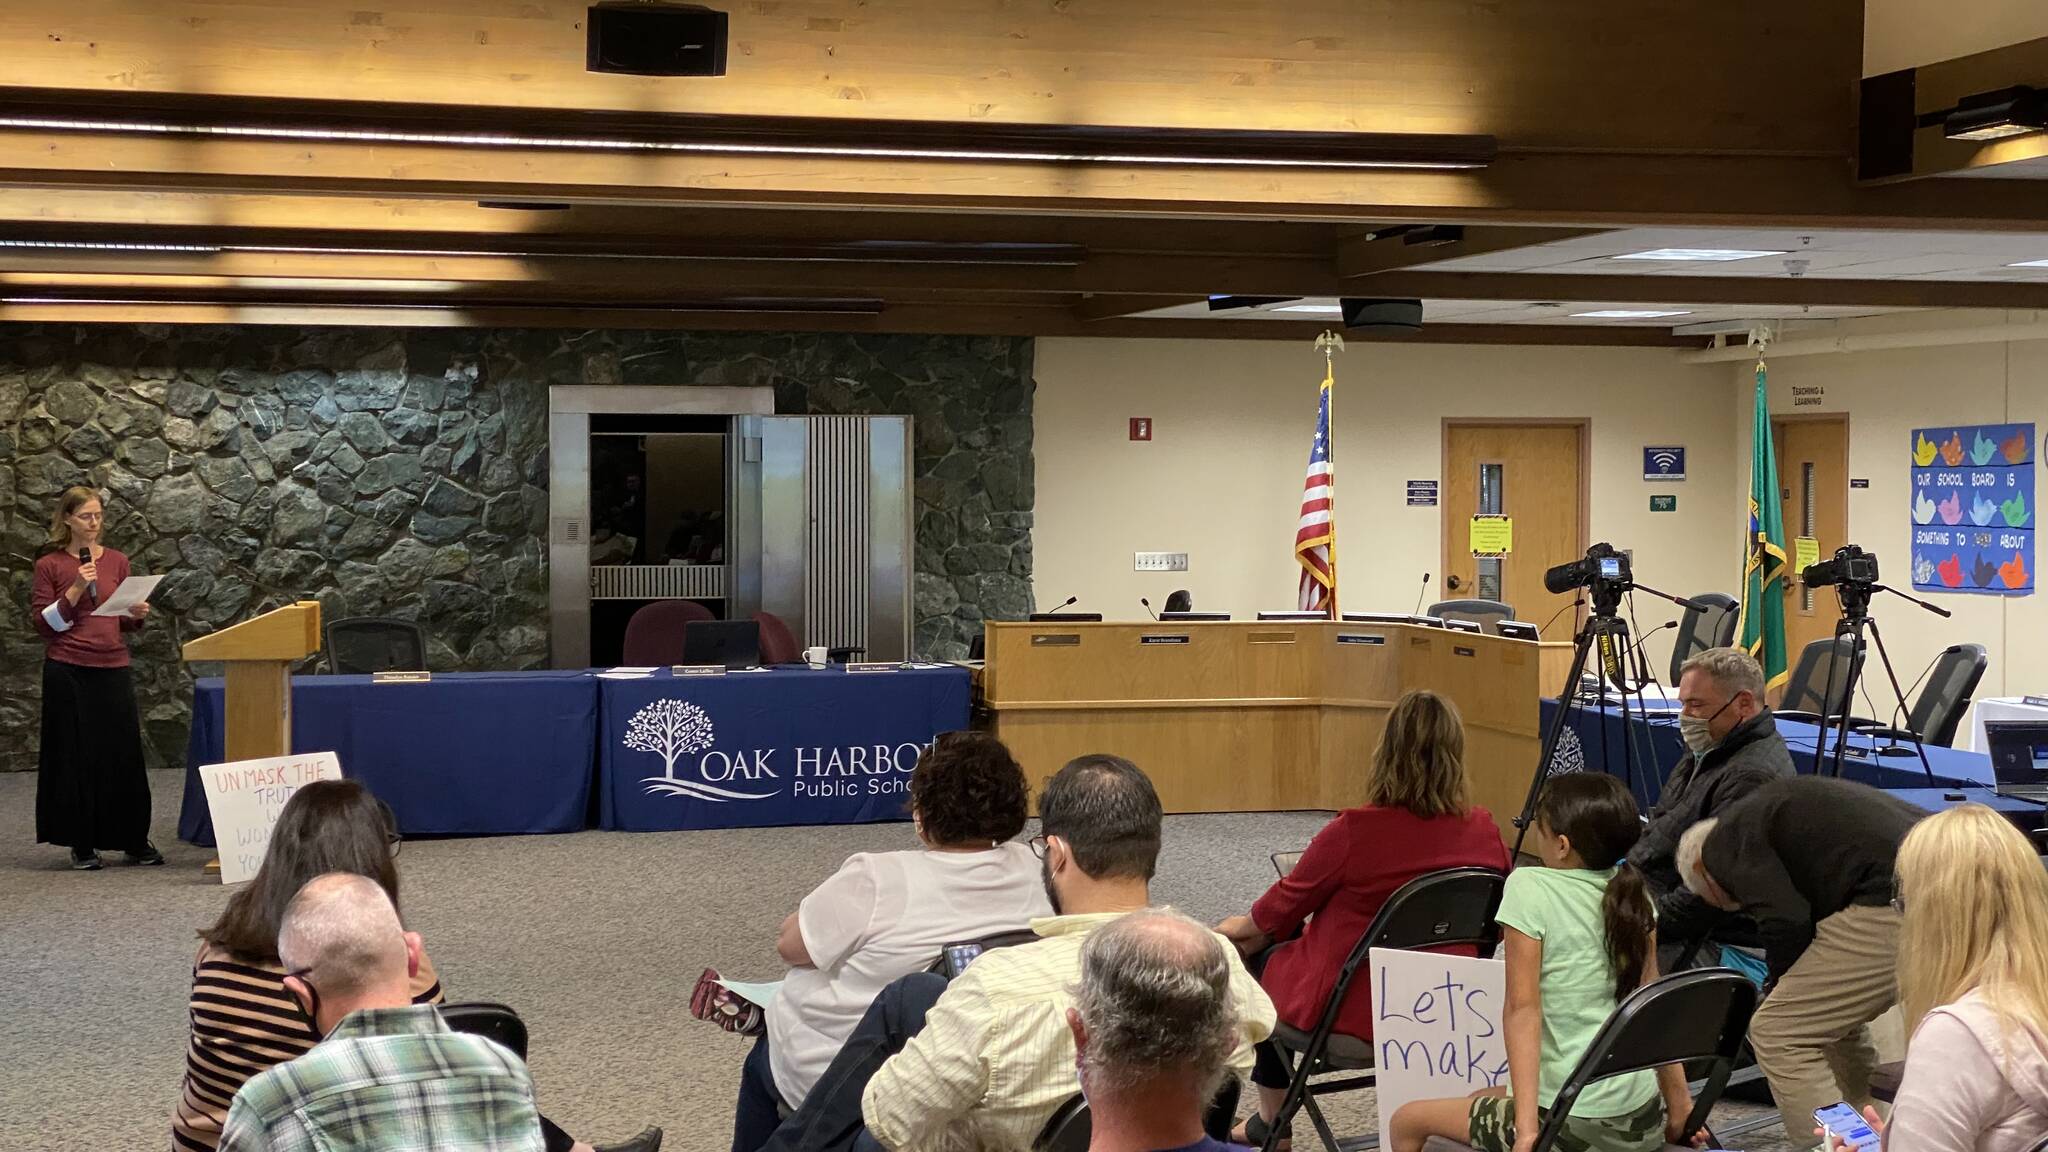 Photo by Jason Uemoto
Several audience members refused to wear a mask or leave the building after Oak Harbor School Board President John Diamond asked them to comply with Gov. Inslee’s indoor mask mandate during the Aug. 30 meeting.